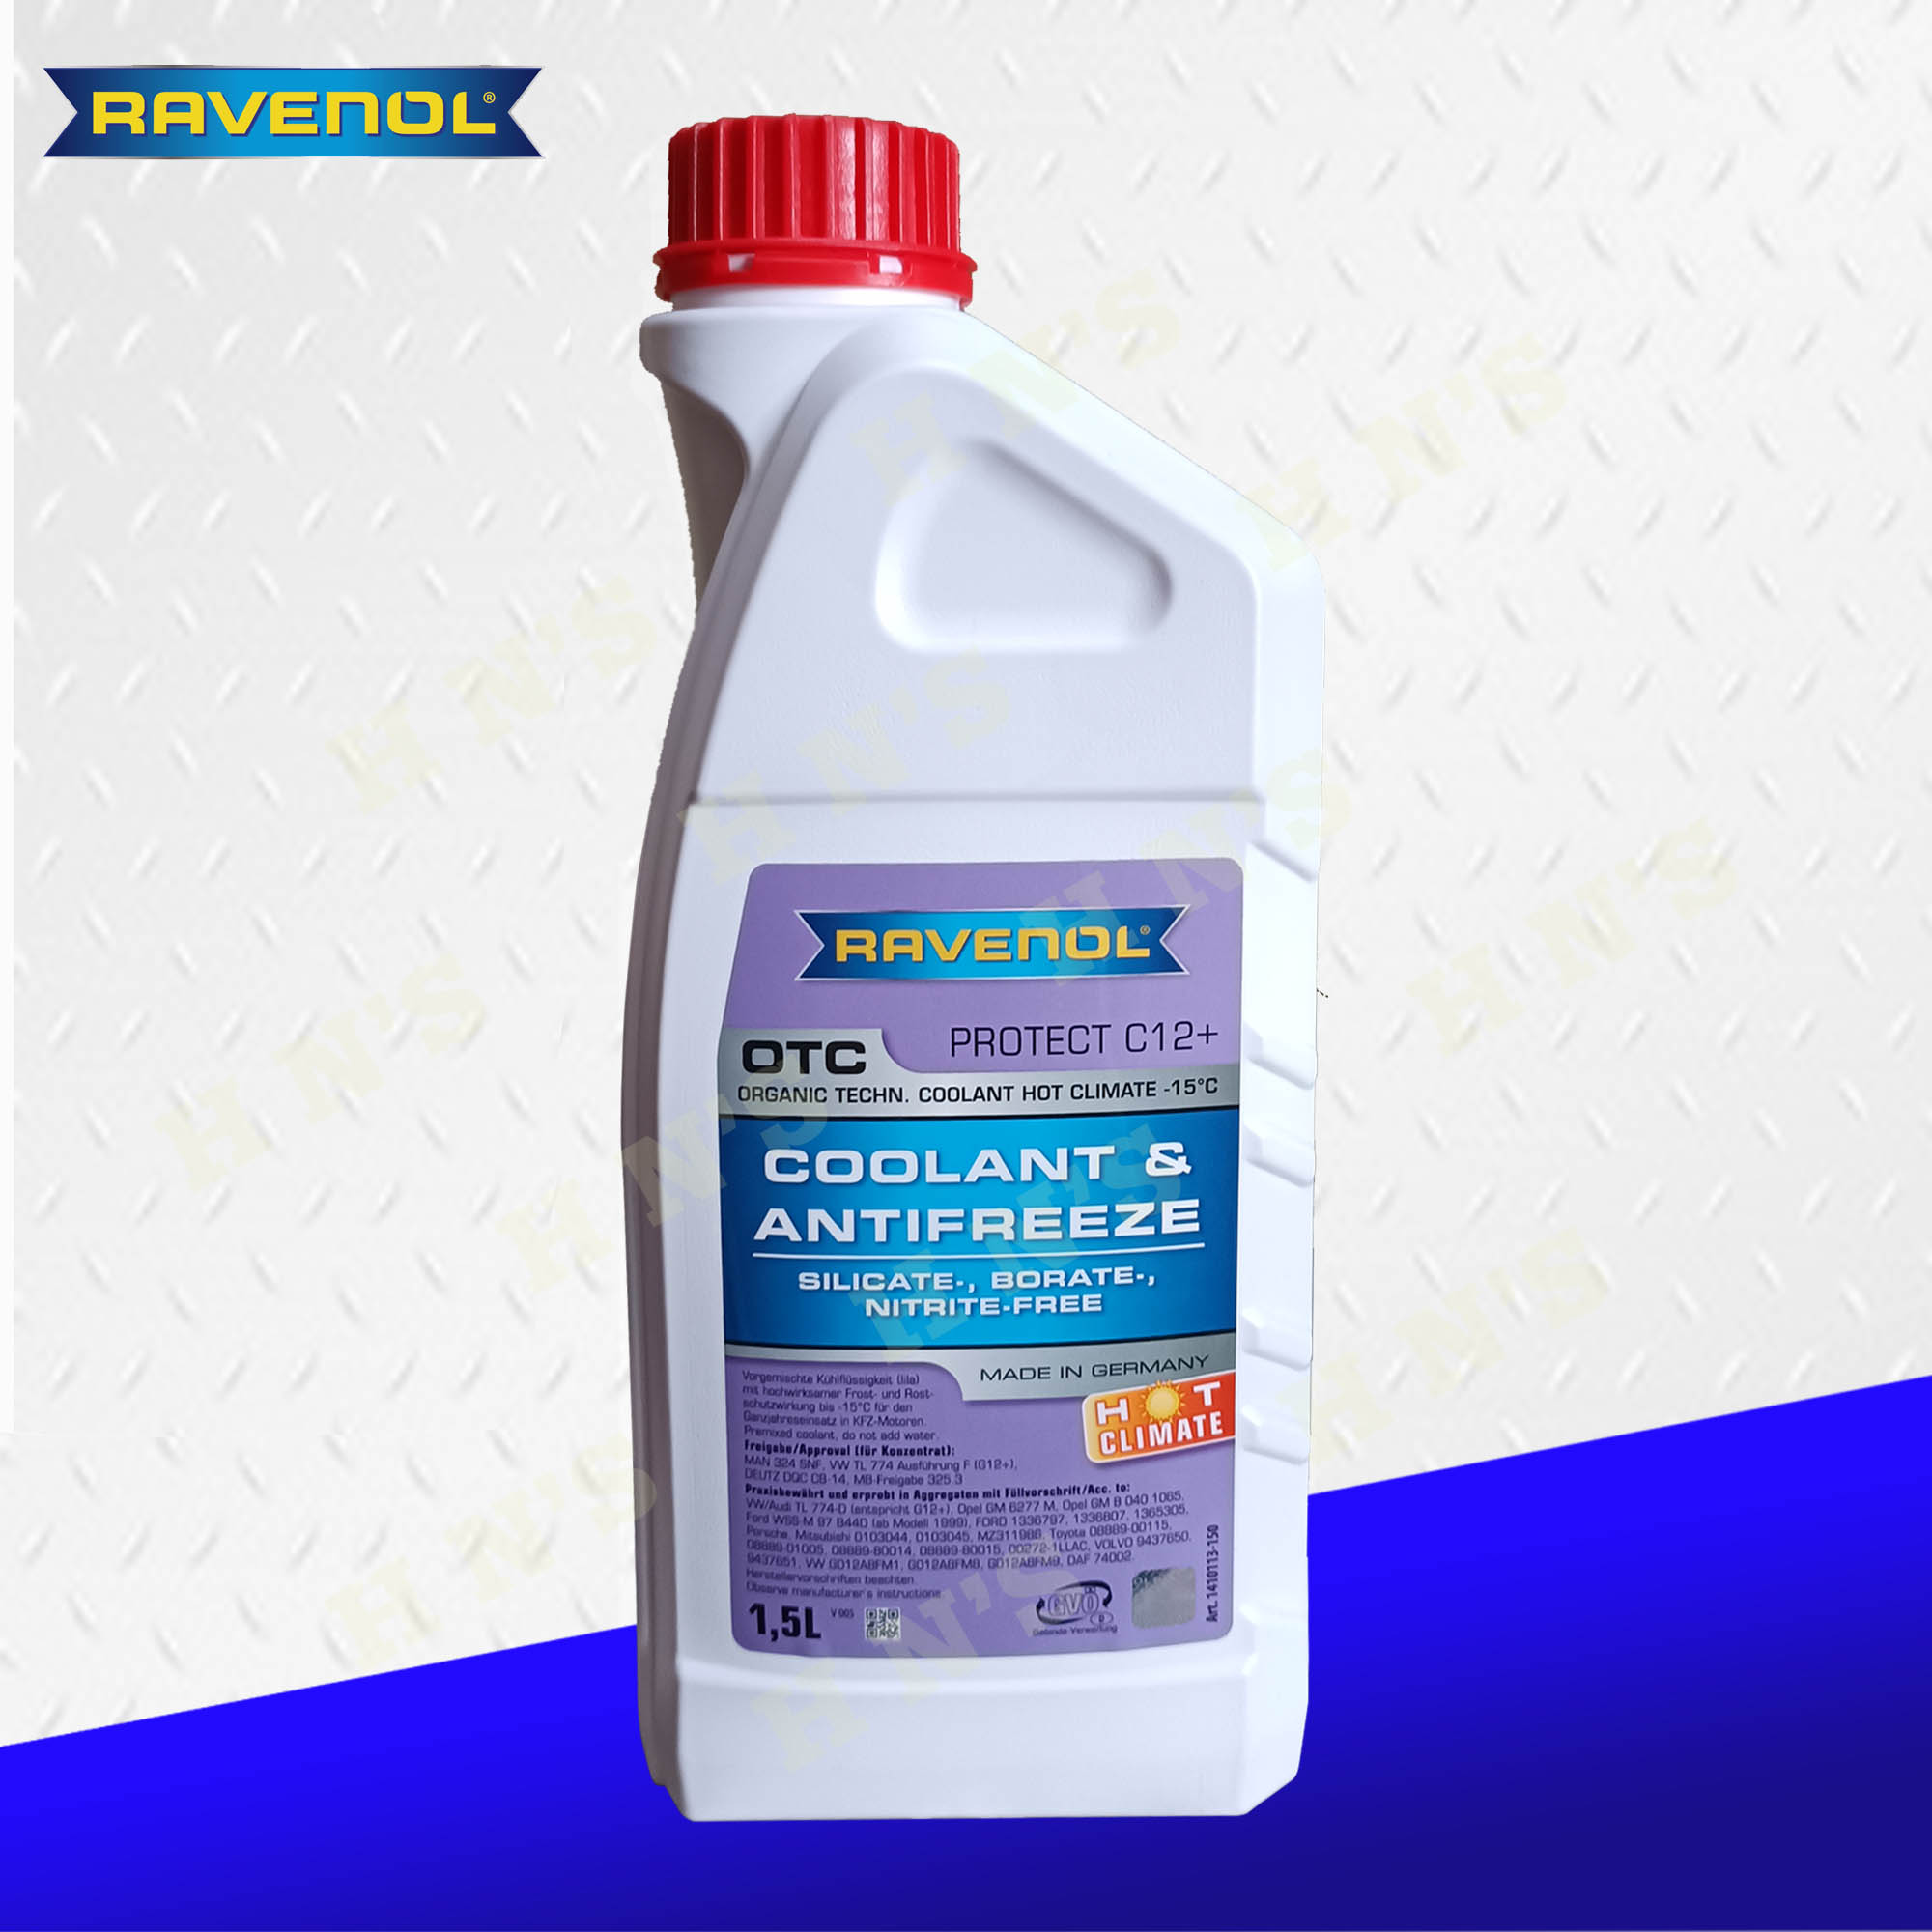 RAVENOL HTC MB 325.0 Coolant for Hot Climate 5L ( 5 Liters ) for